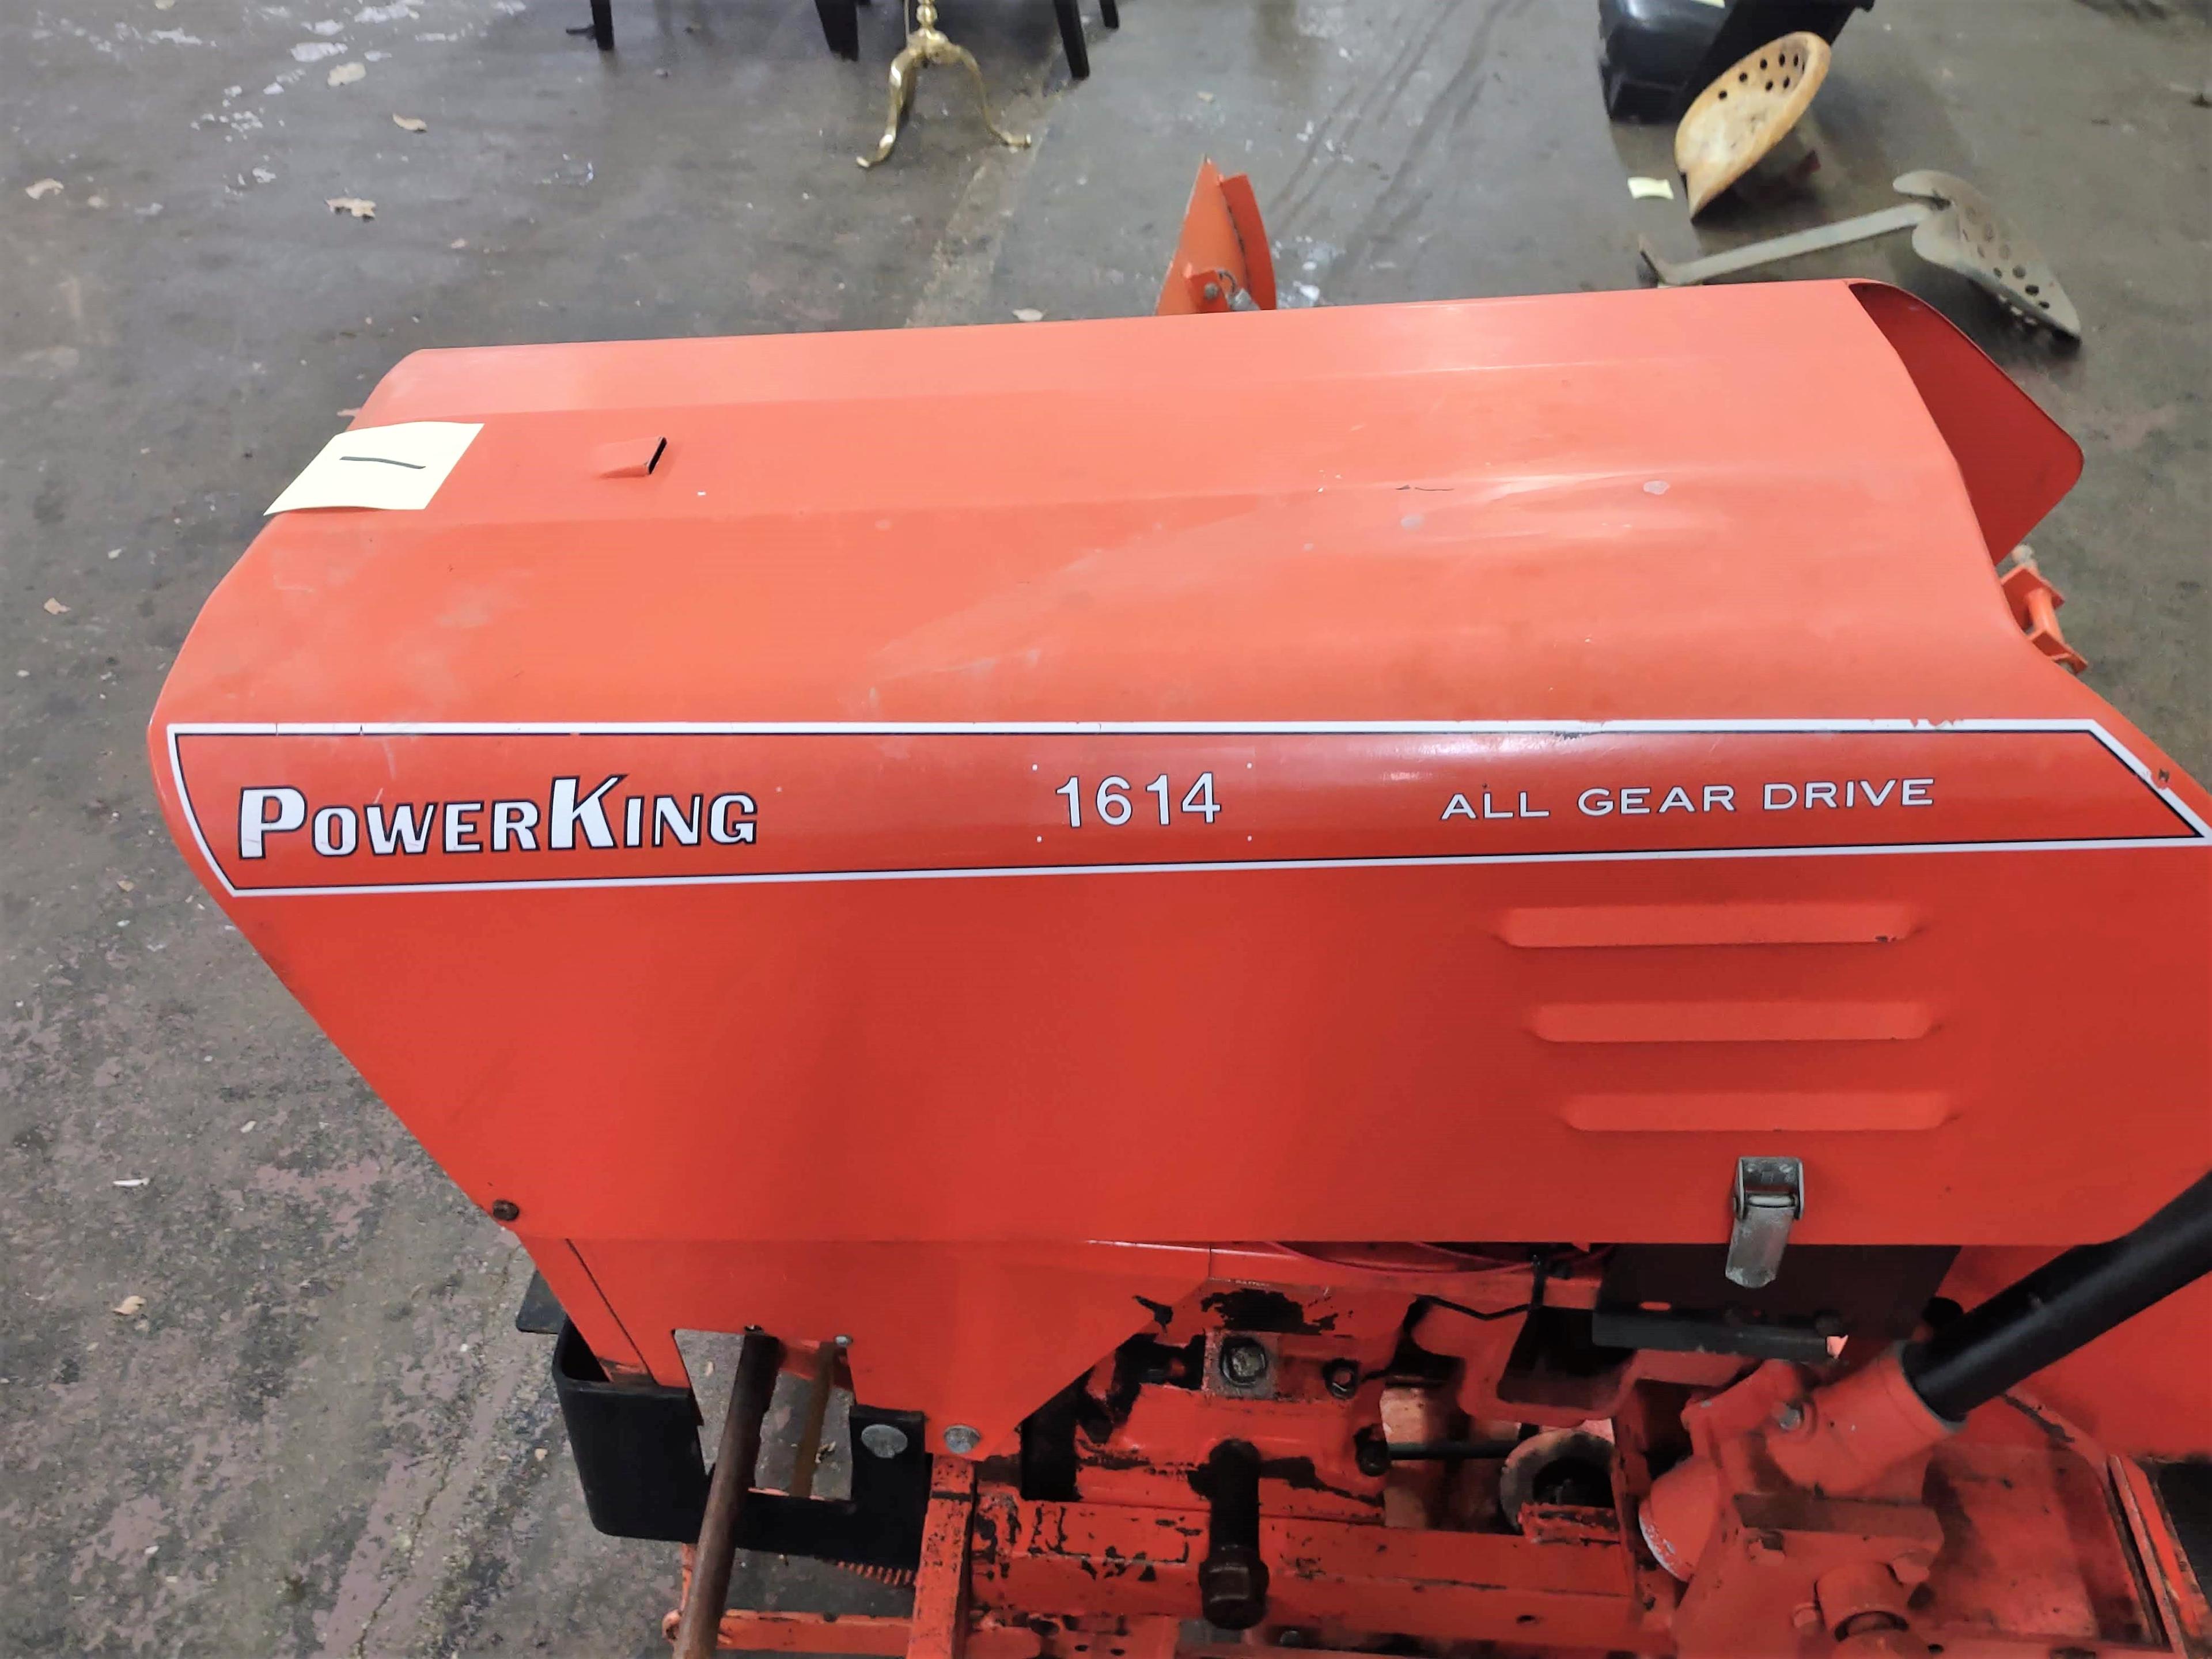 POWER KING 1614 ALL GEAR DRIVE TRACTOR with MOWER DECK & PUSH BLADE - 3 PT HITCH - PICK UP ONLY